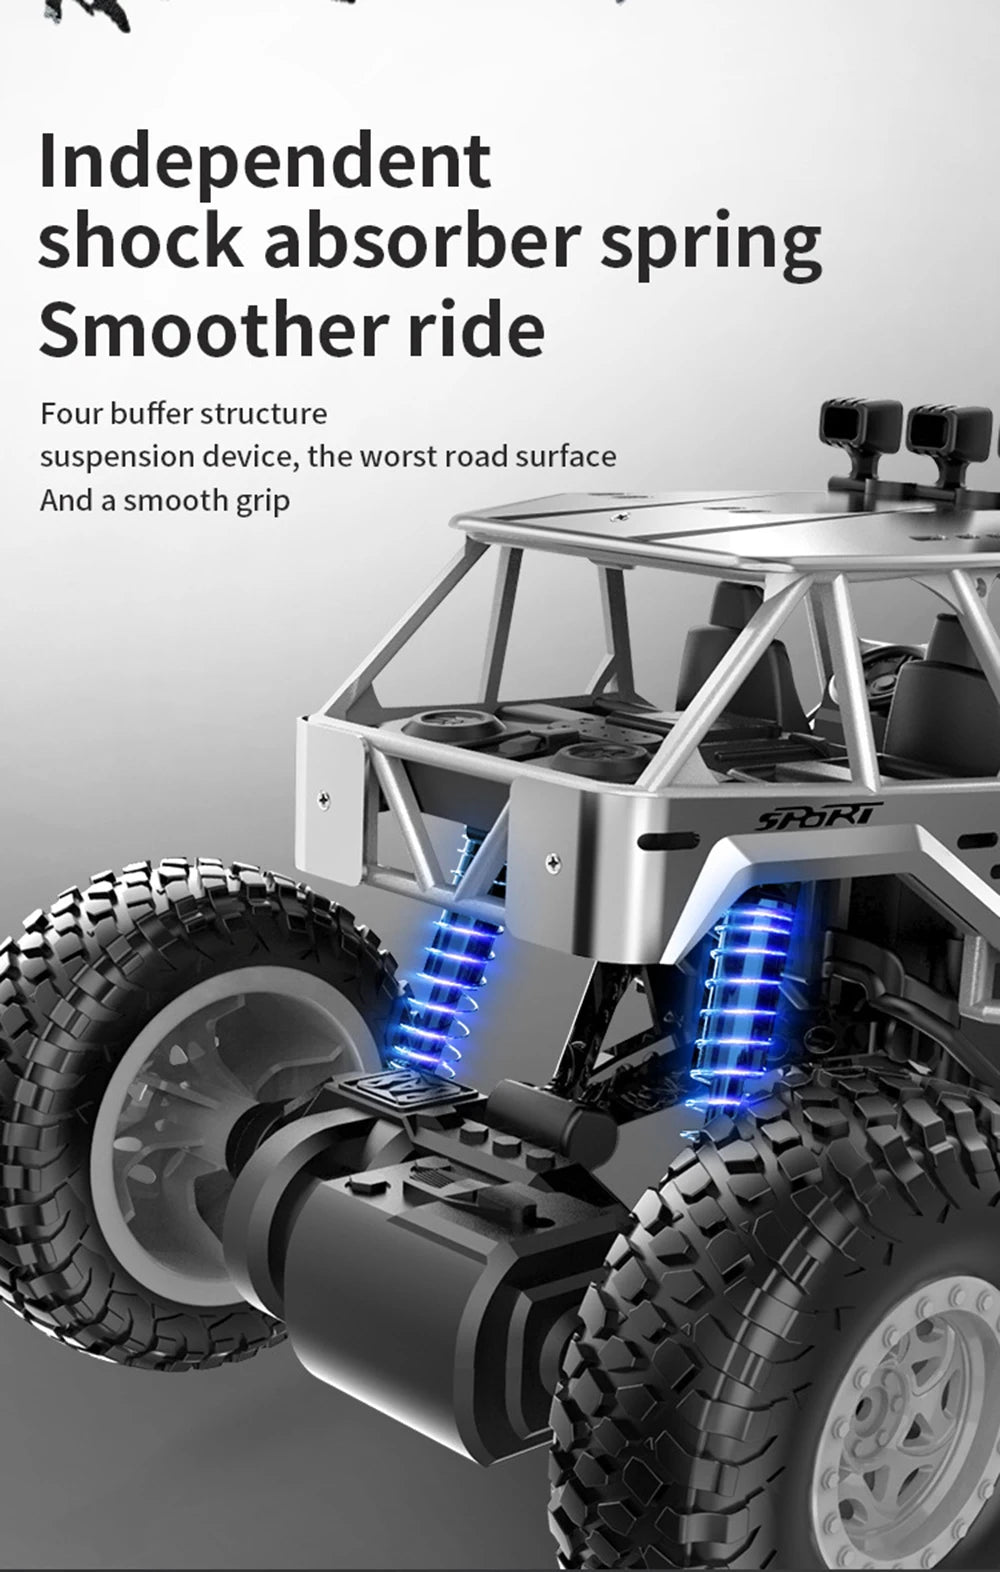 a smoother ride Four buffer structure suspension device, the worst road surface . a